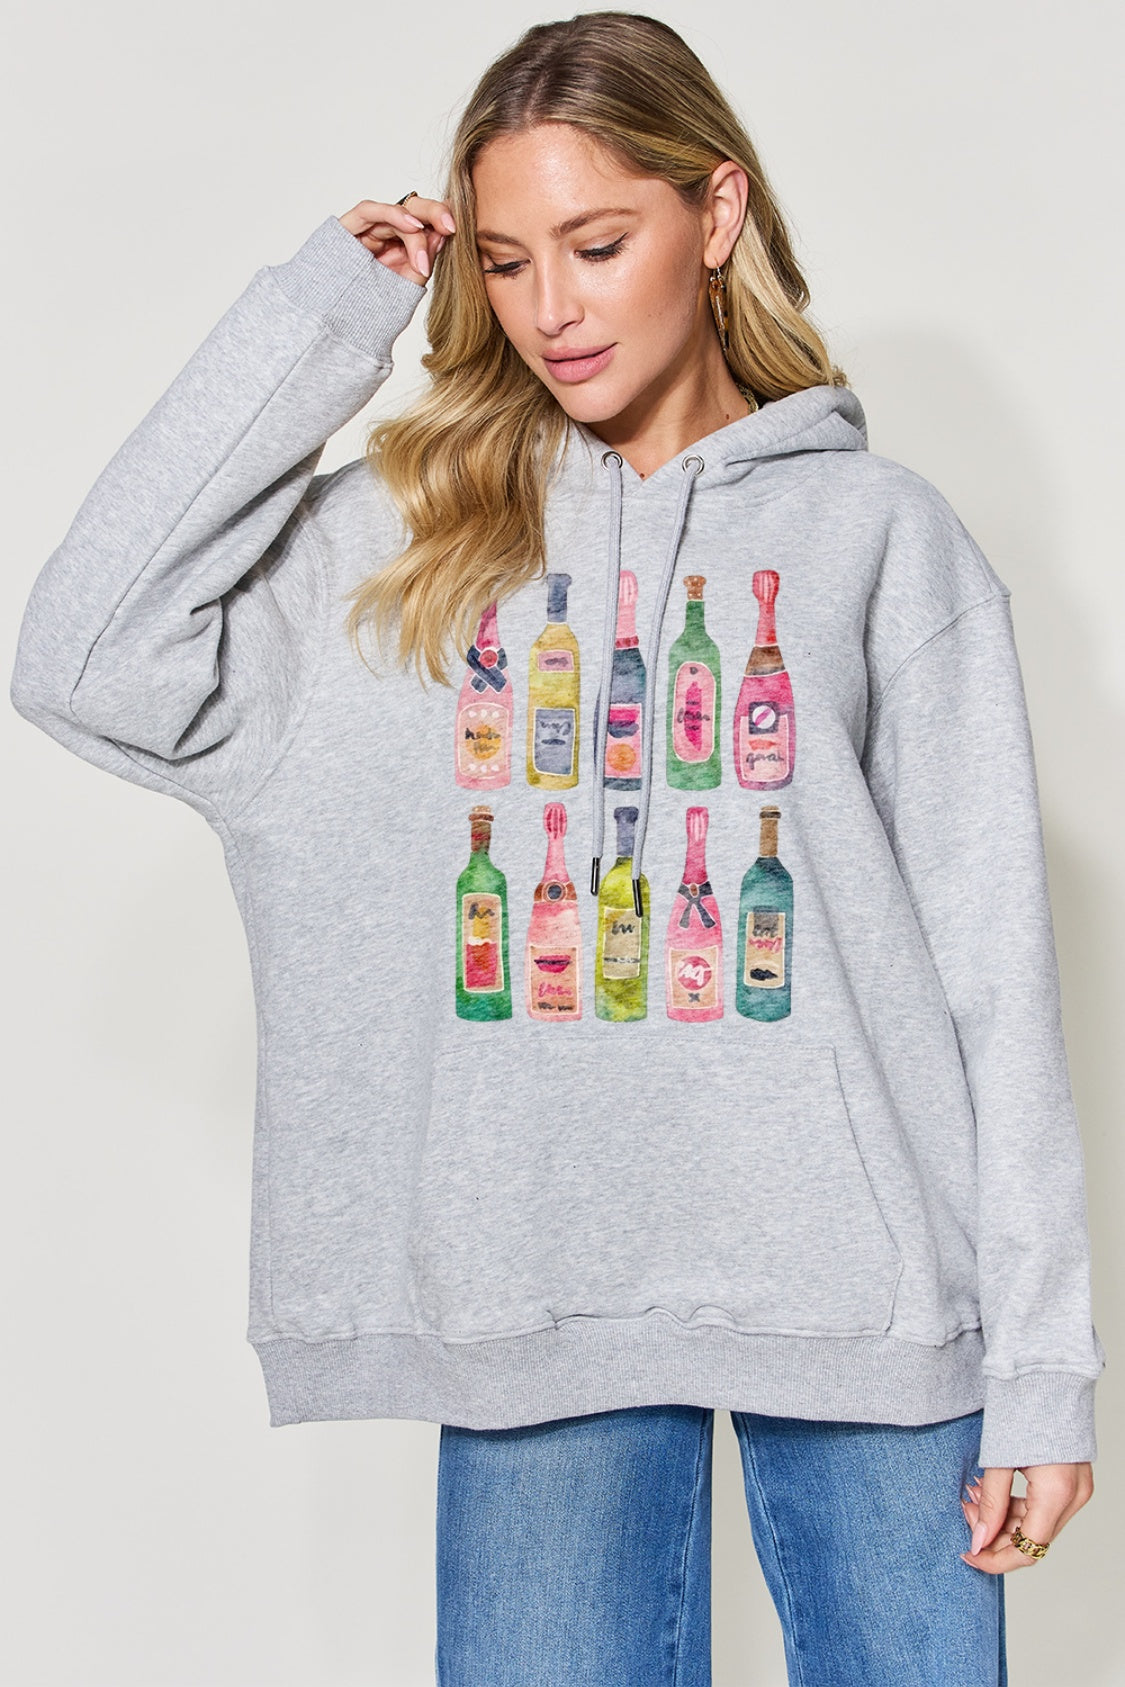 Simply Love Full Size Bottle Graphic Long Sleeve Drawstring Hoodie